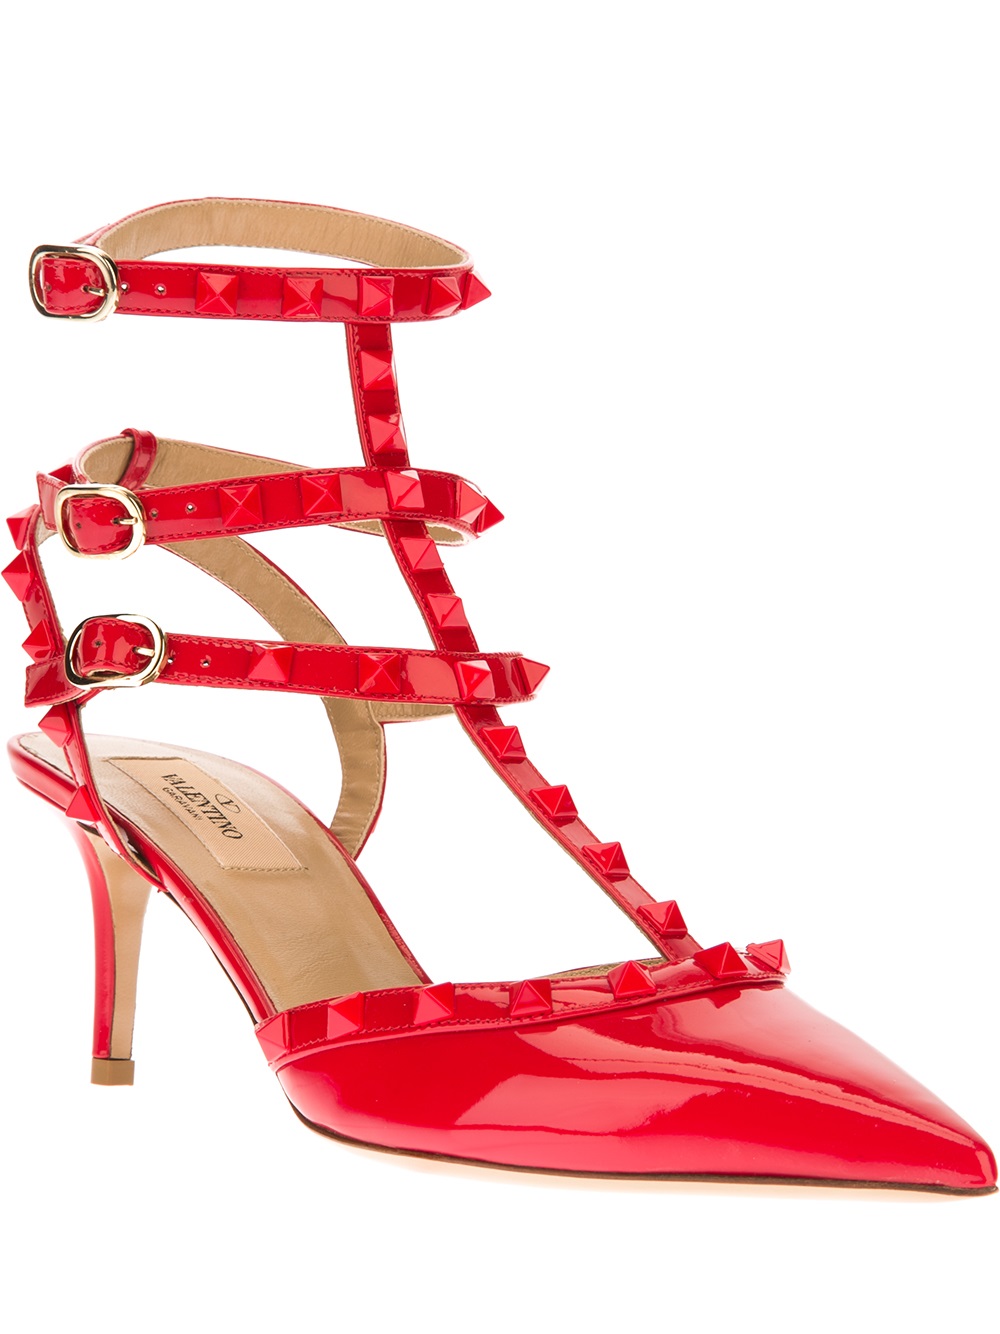 Lyst - Valentino Studded Mid Heel Sandal in Red